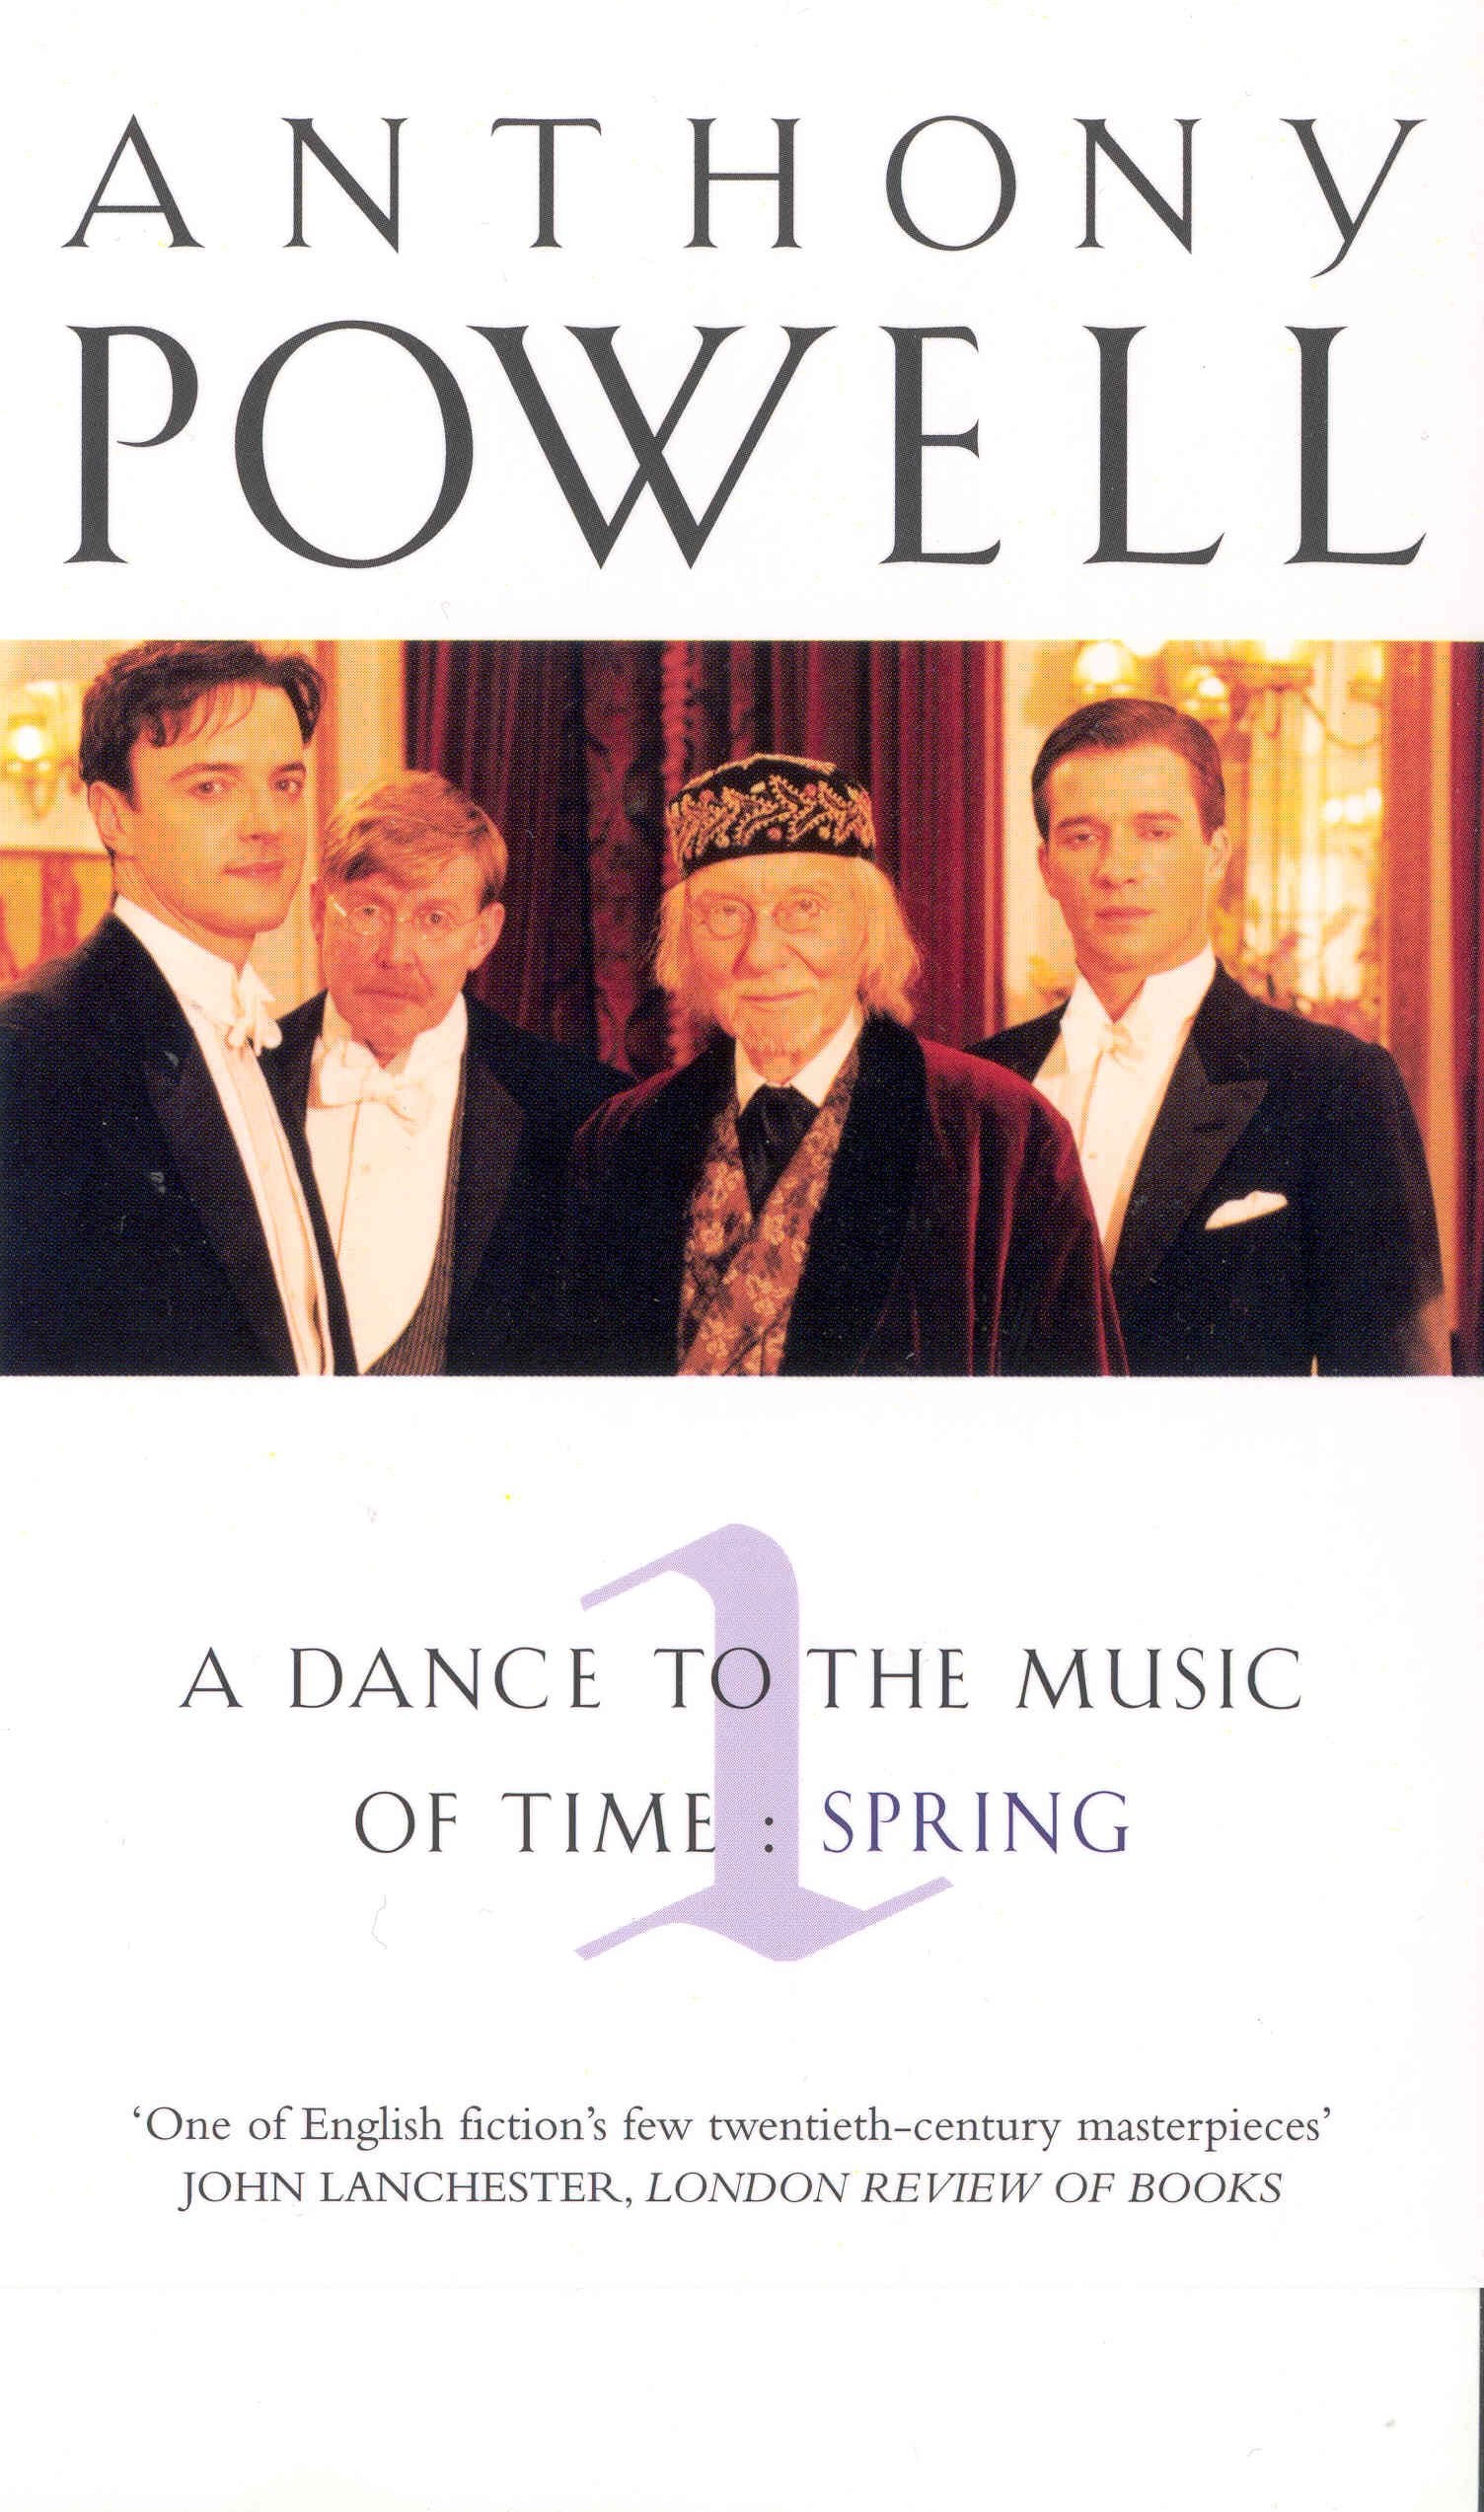 The artwork for a volume containing the first three novels of A Dance to the Music of Time